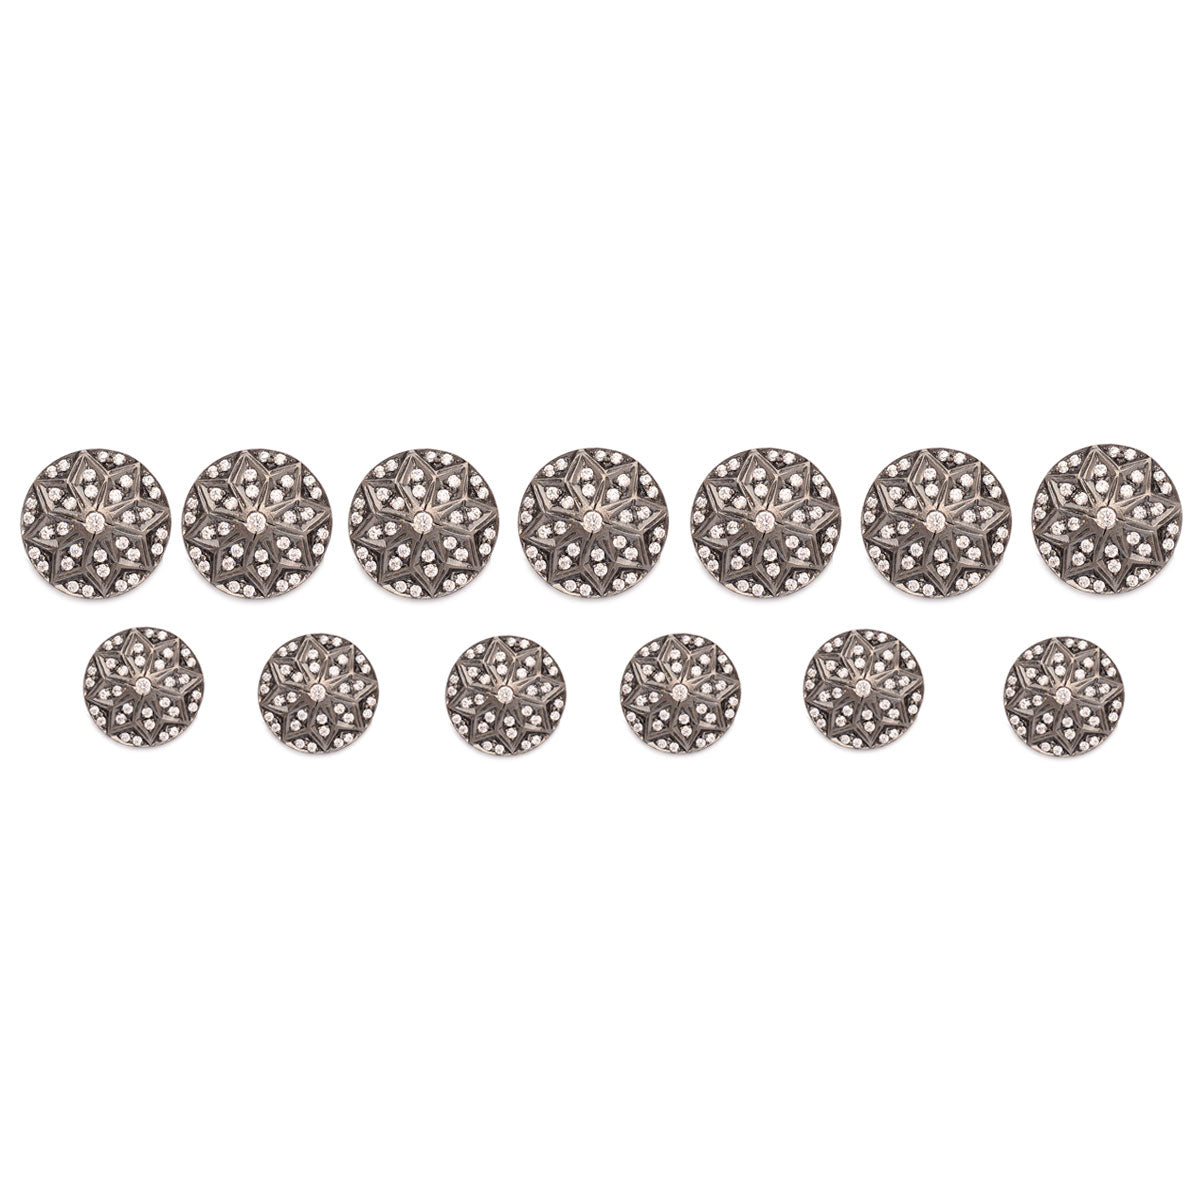 Peshwa Silver Buttons